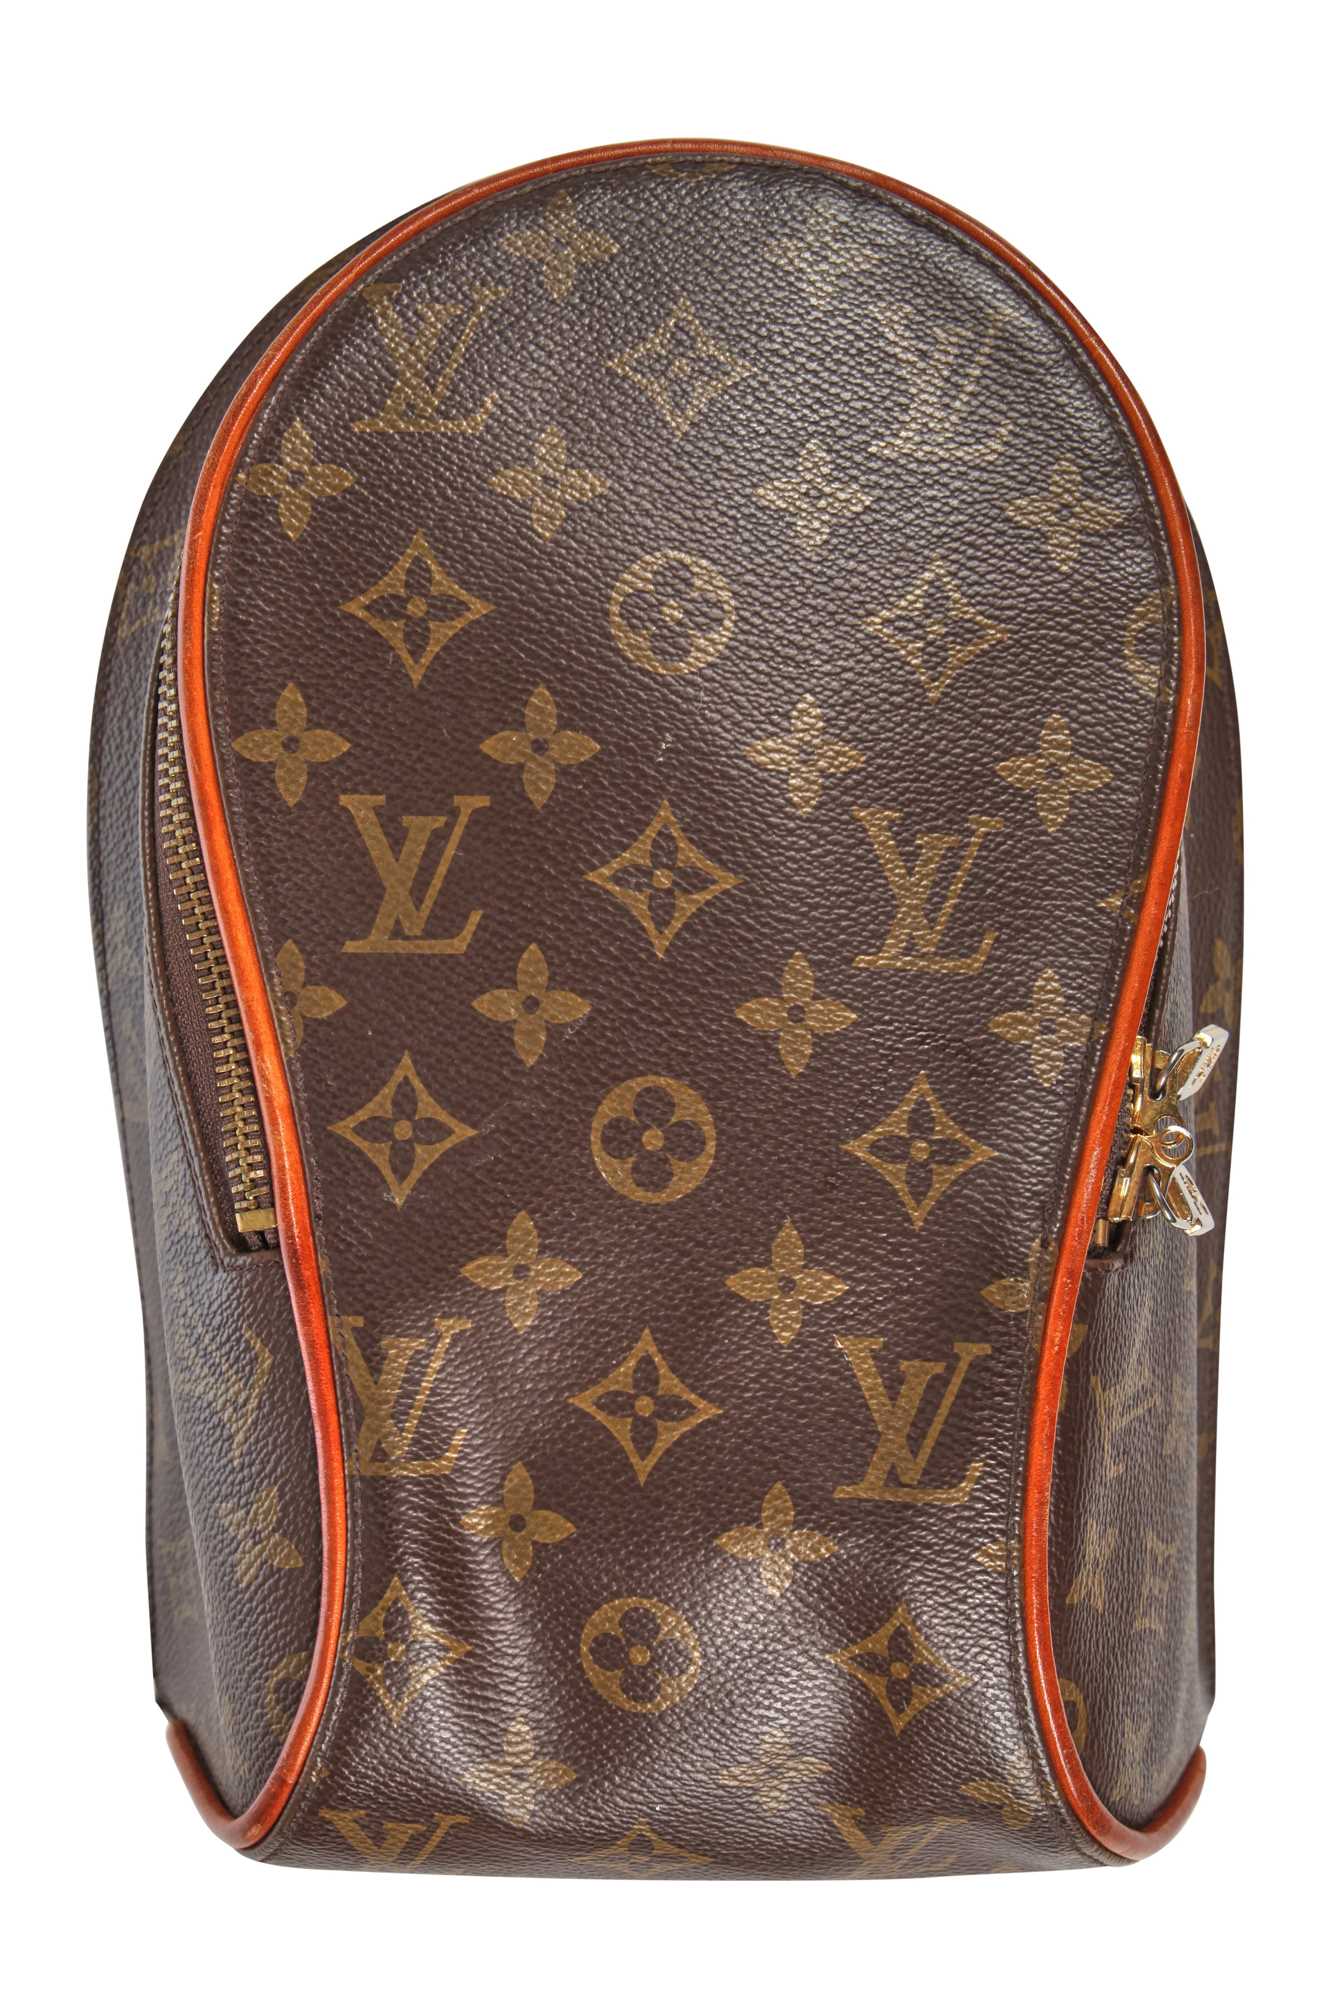 LOUIS VUITTON VIRGIL ABLOH TAURILLON ORANGE LEATHER BACKPACK LIMITED  EDITION  eBay